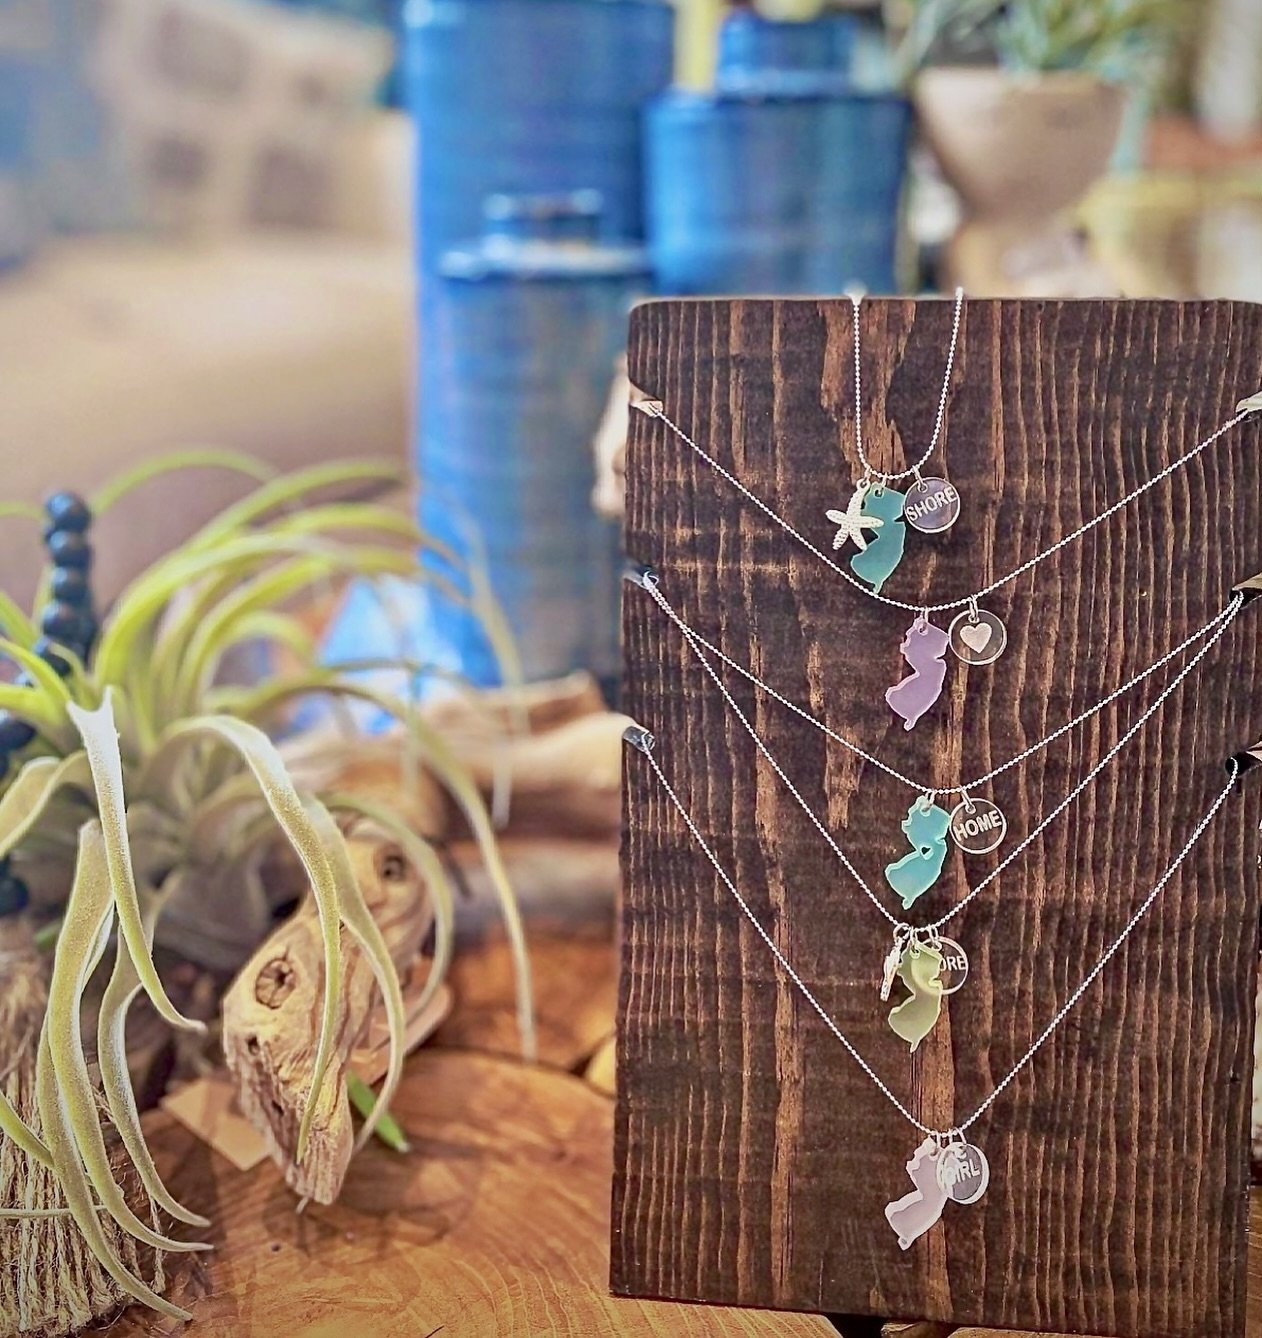 NJ necklaces are back in stock. As always they can be customized to however you choose with colors and charms and make the perfect gift&hellip; #mothersday #graduation 

.
.
#CoastalDecor #NJnecklaces #Jewlry #Giftideas #SmallBussiness #LittleSilverN